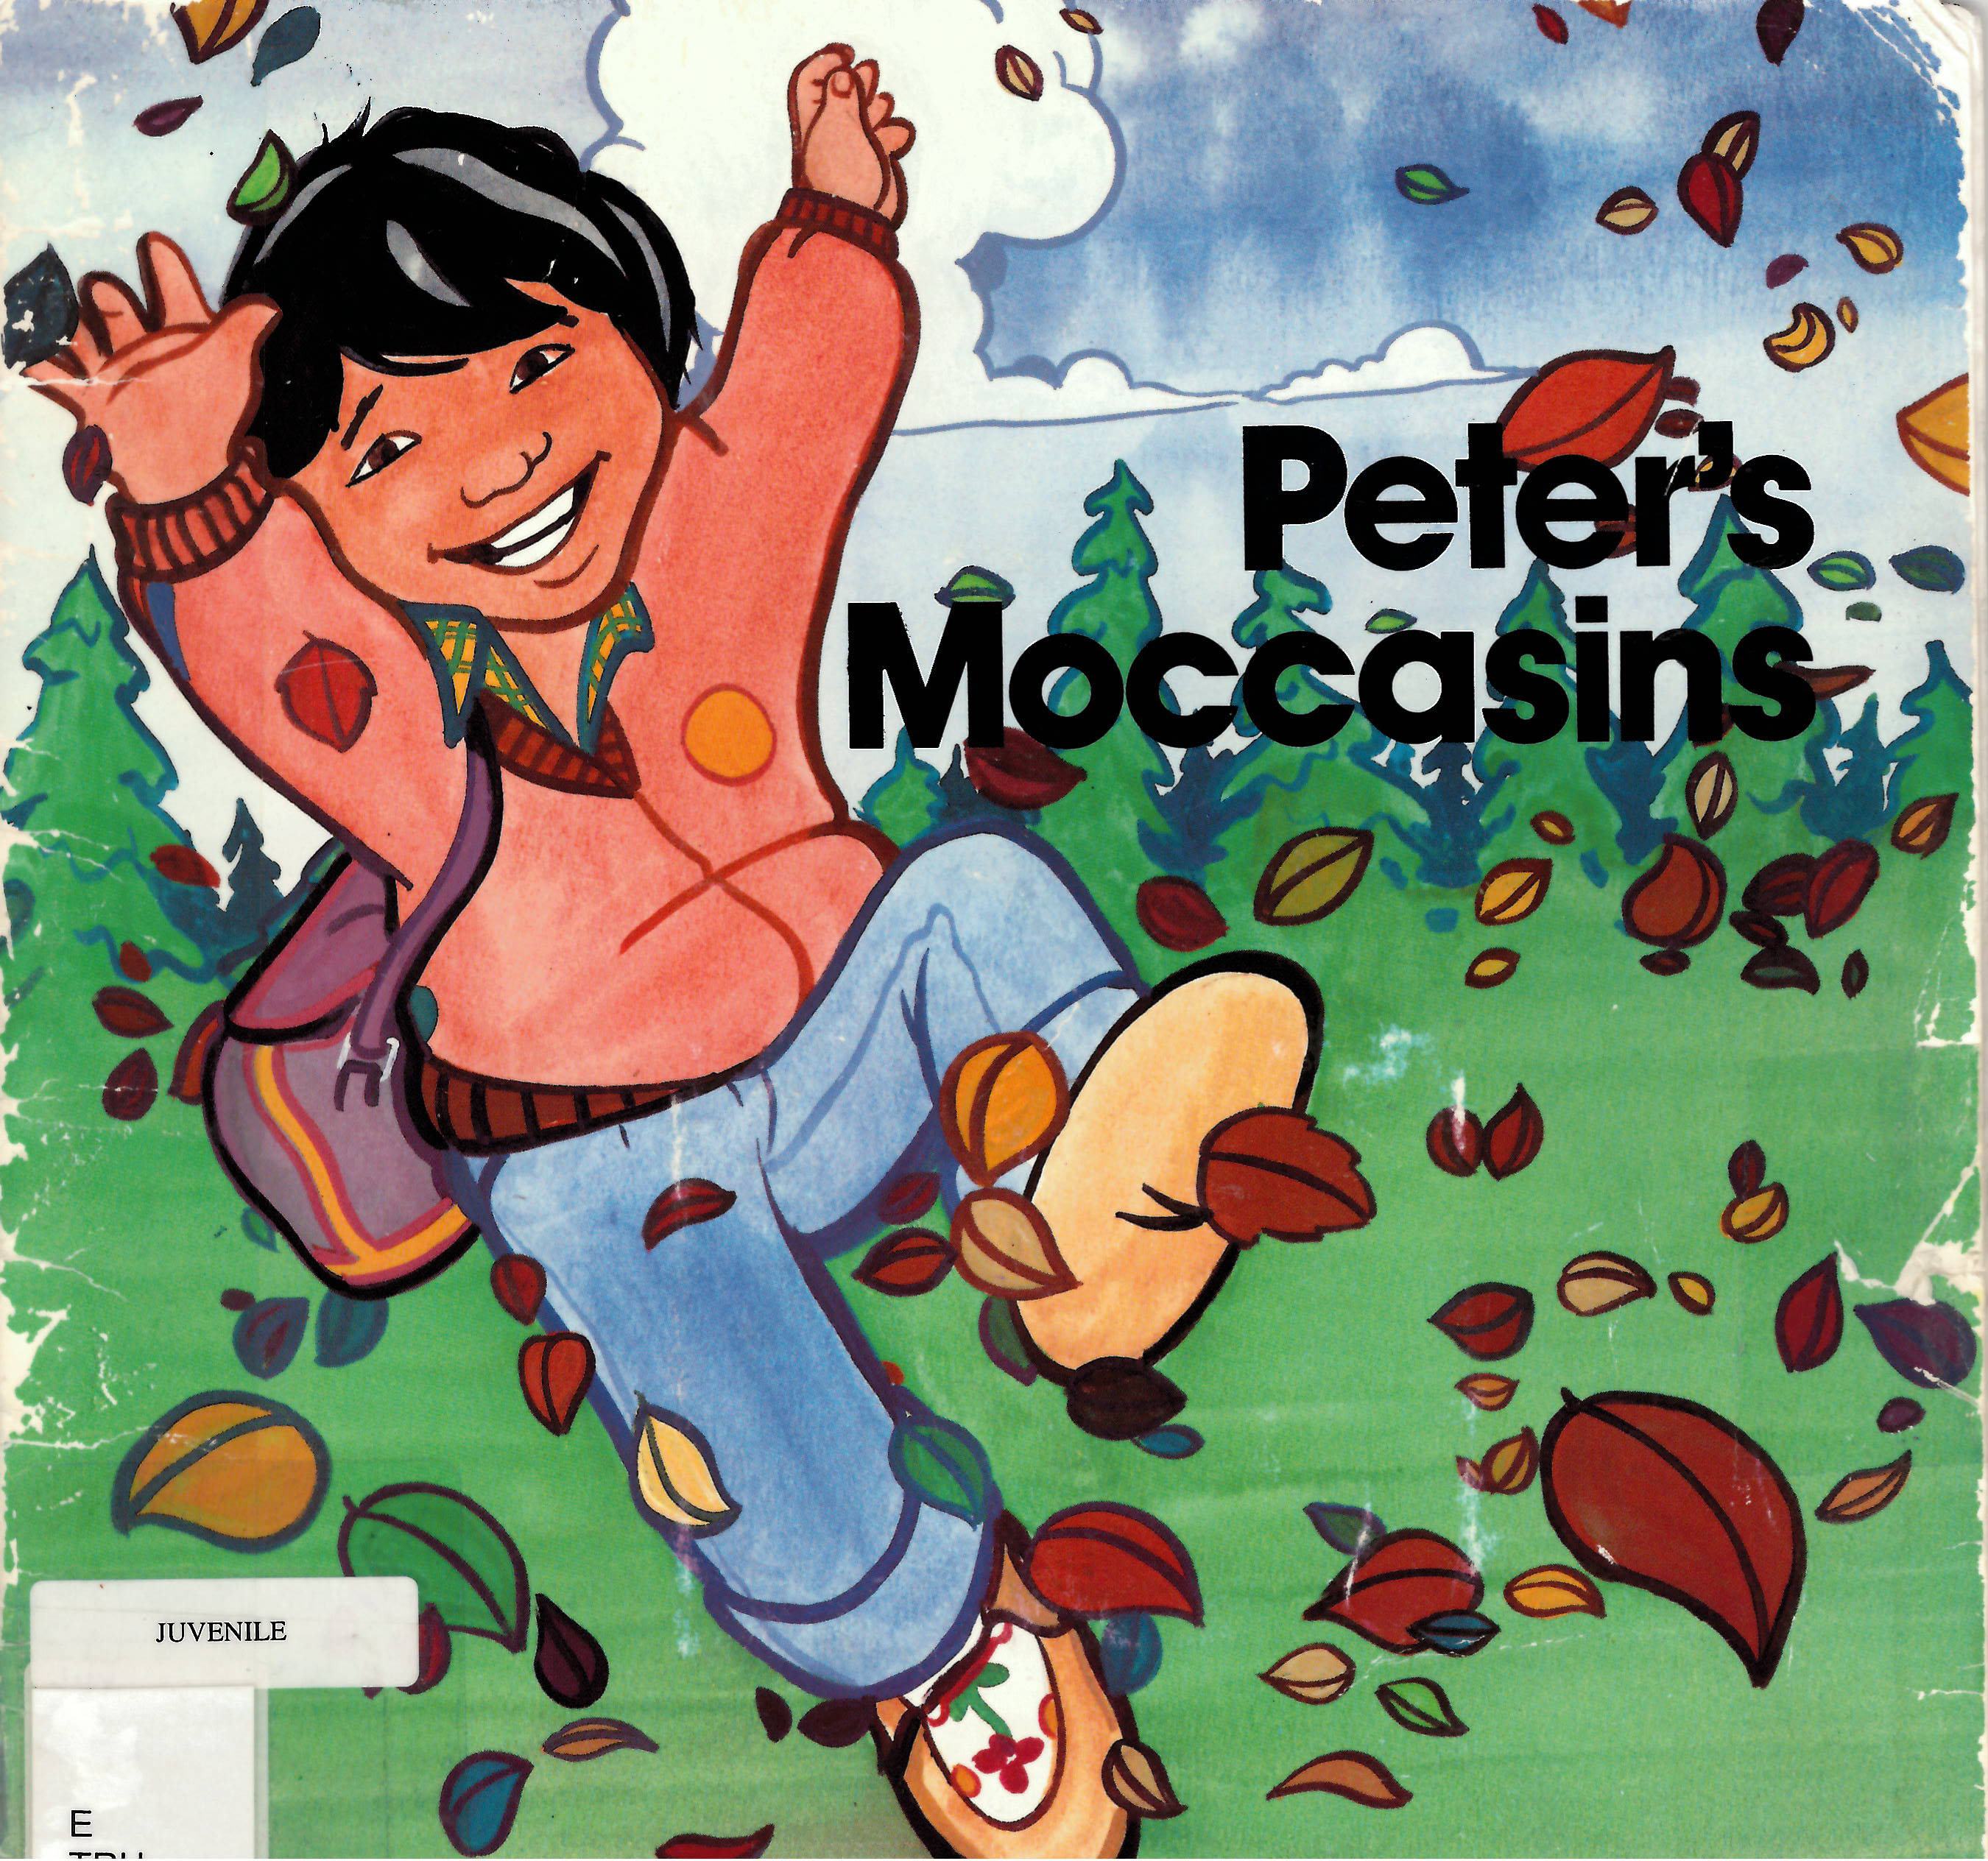 Peter's moccasins